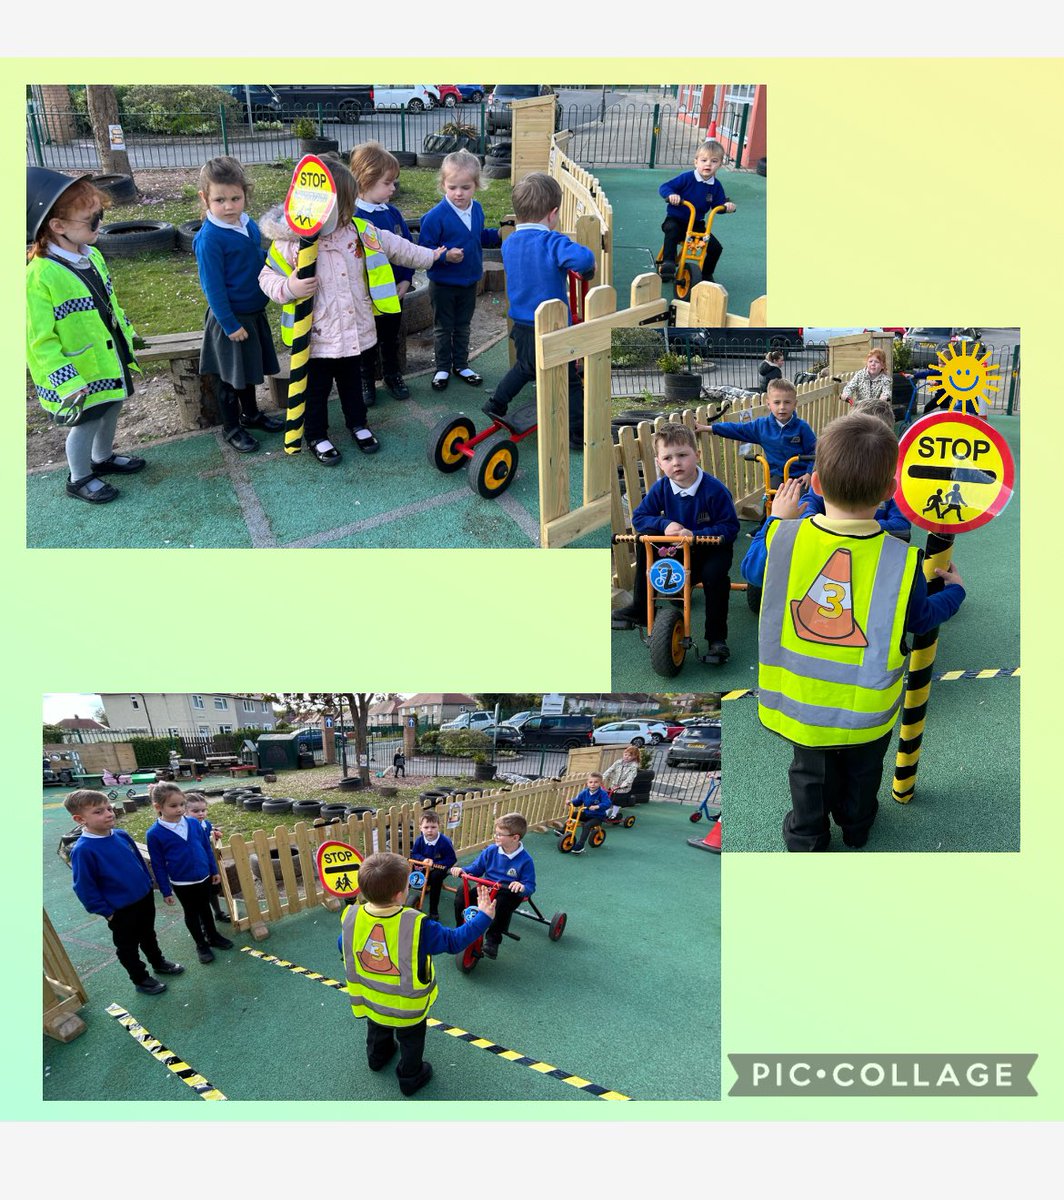 We used what we had learnt on Beep Beep! Day to keep each other safe as we walked through the bike area today #BeepBeepDay #WalesOutdoorLearningWeek @YsgolMaesglas